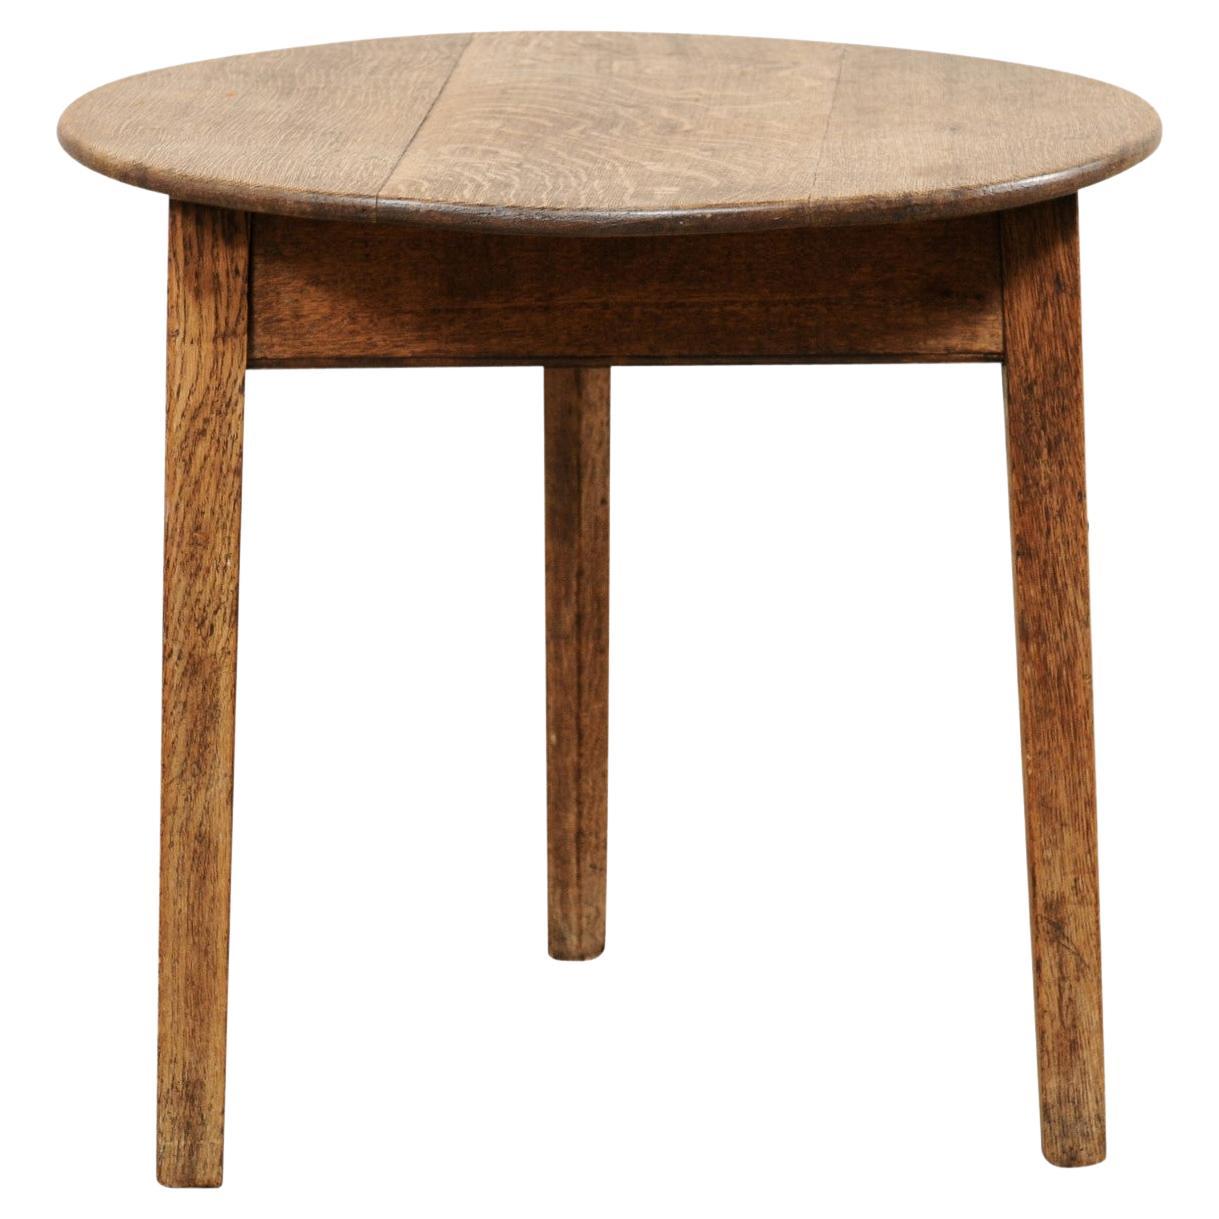 English Round Oak Wood Occasional Table from the 19th Century